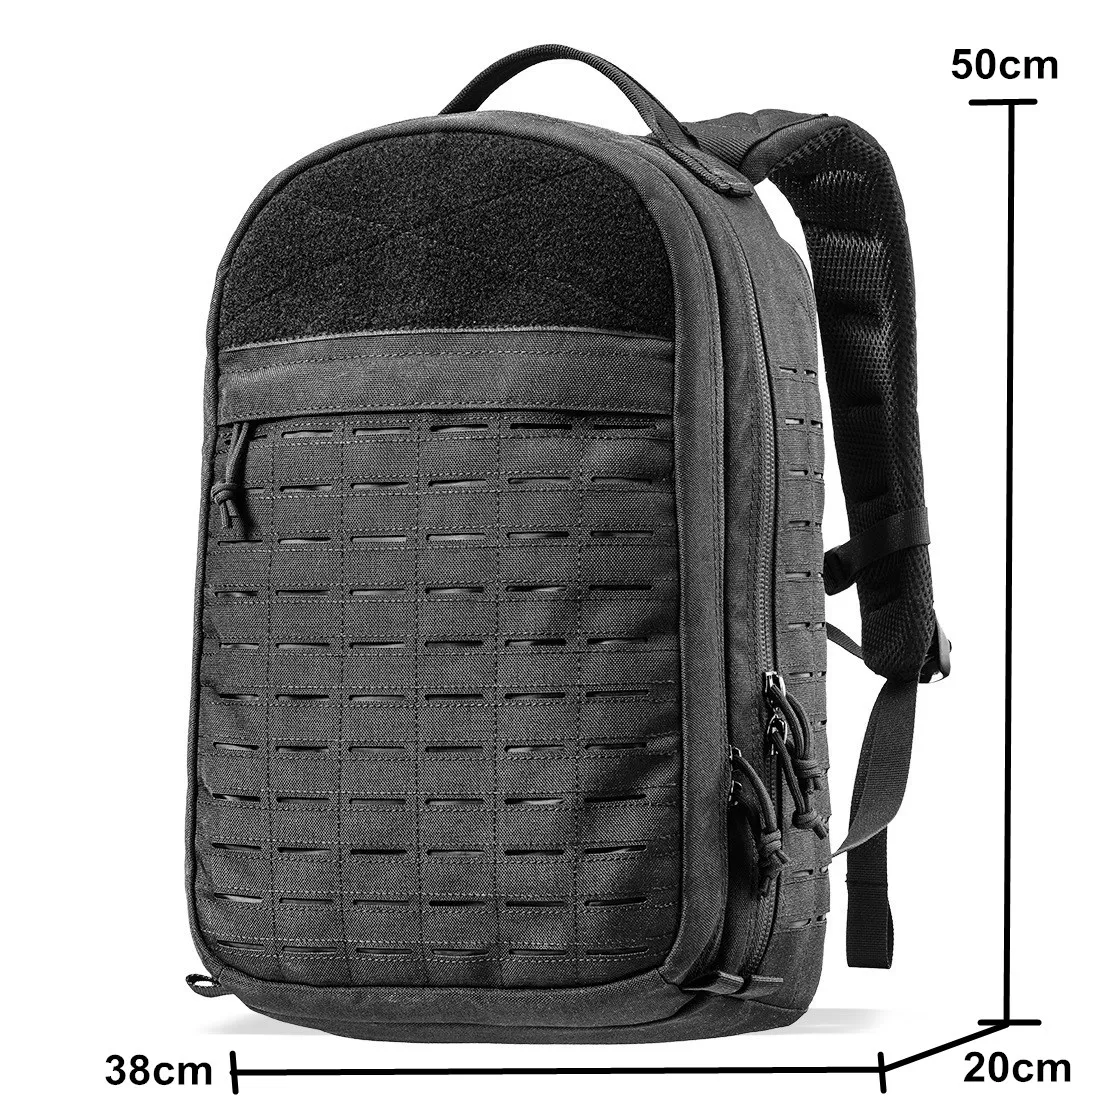 Molle Tactical Bag Army Fans Sports Equipment Camouflage Military Backpack 1000D Outdoor Waterproof Hiking Camping Bag 35L